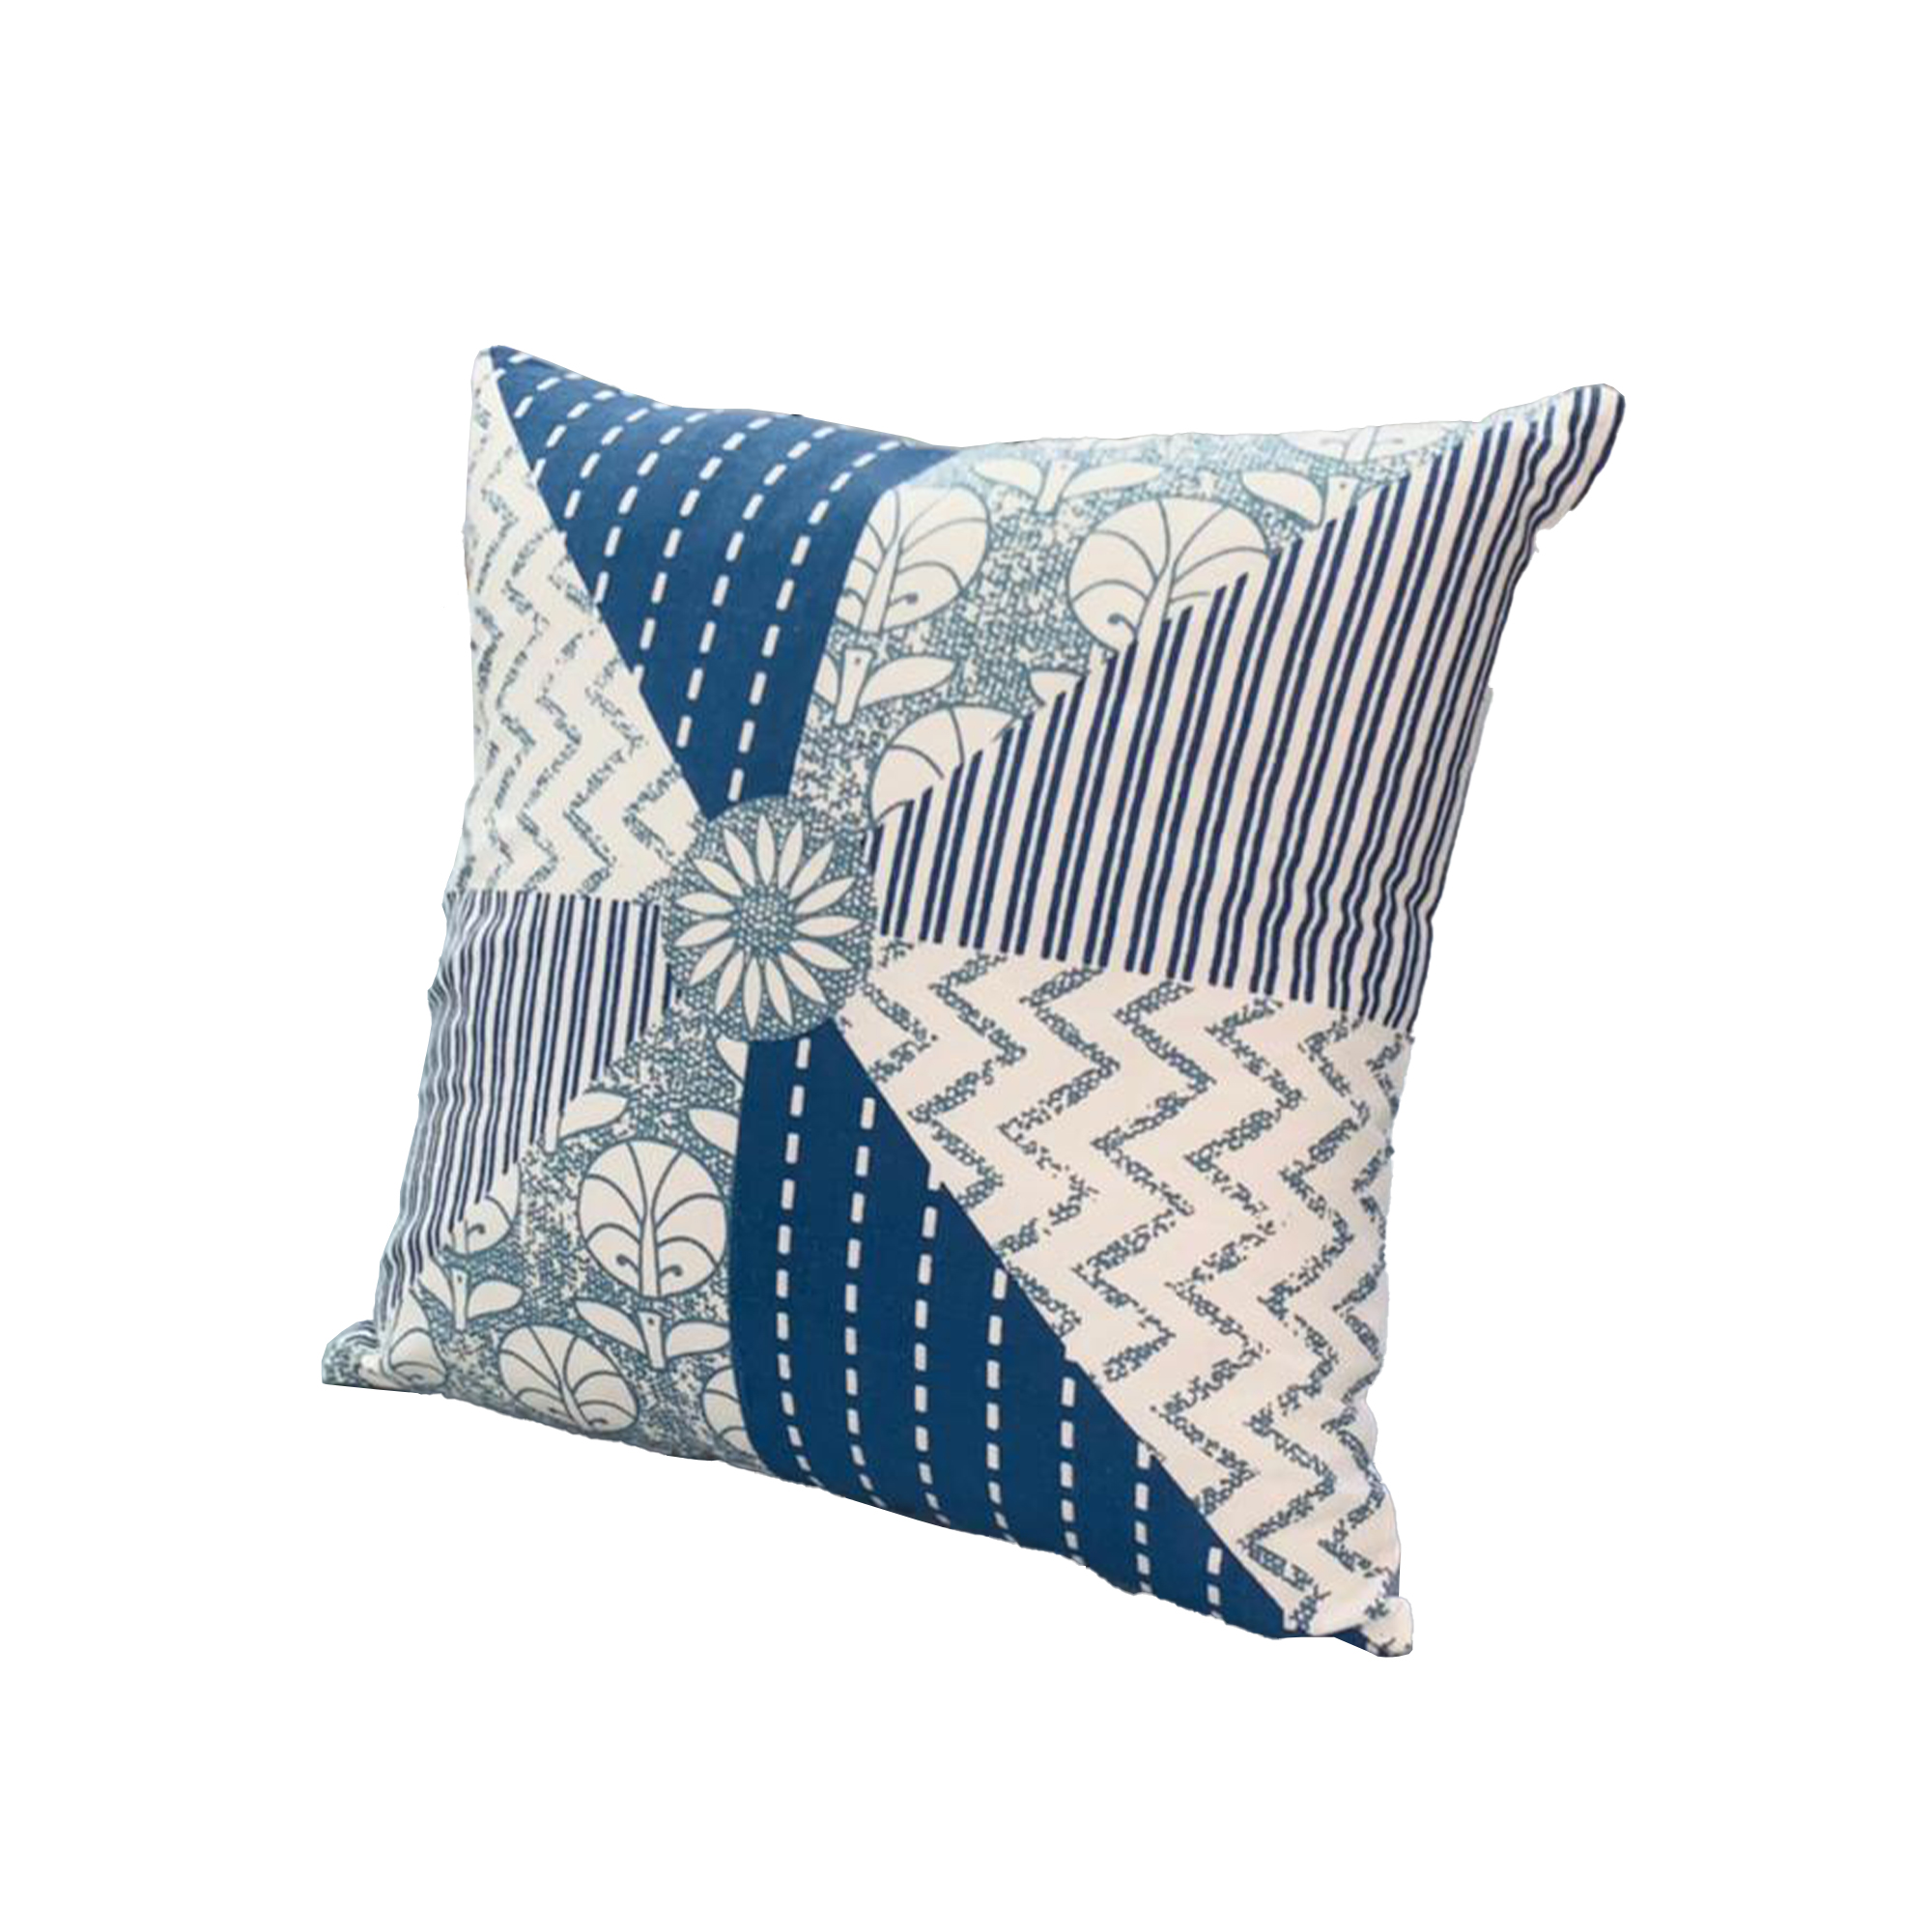 18 x 18 Square Accent Pillow, Geometric Pattern, Soft Cotton Cover, Polyester Filler, Blue, White